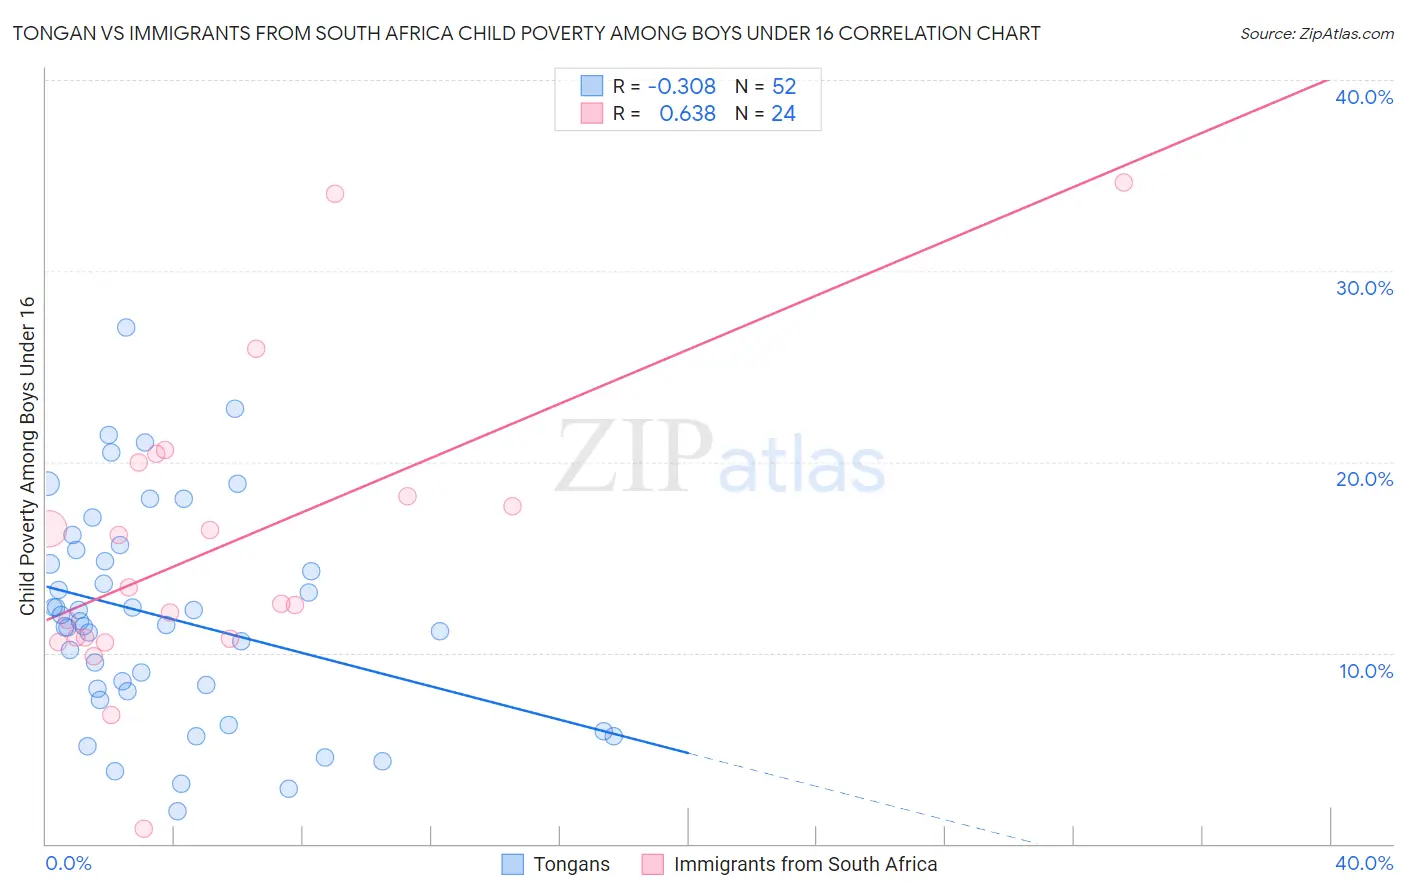 Tongan vs Immigrants from South Africa Child Poverty Among Boys Under 16